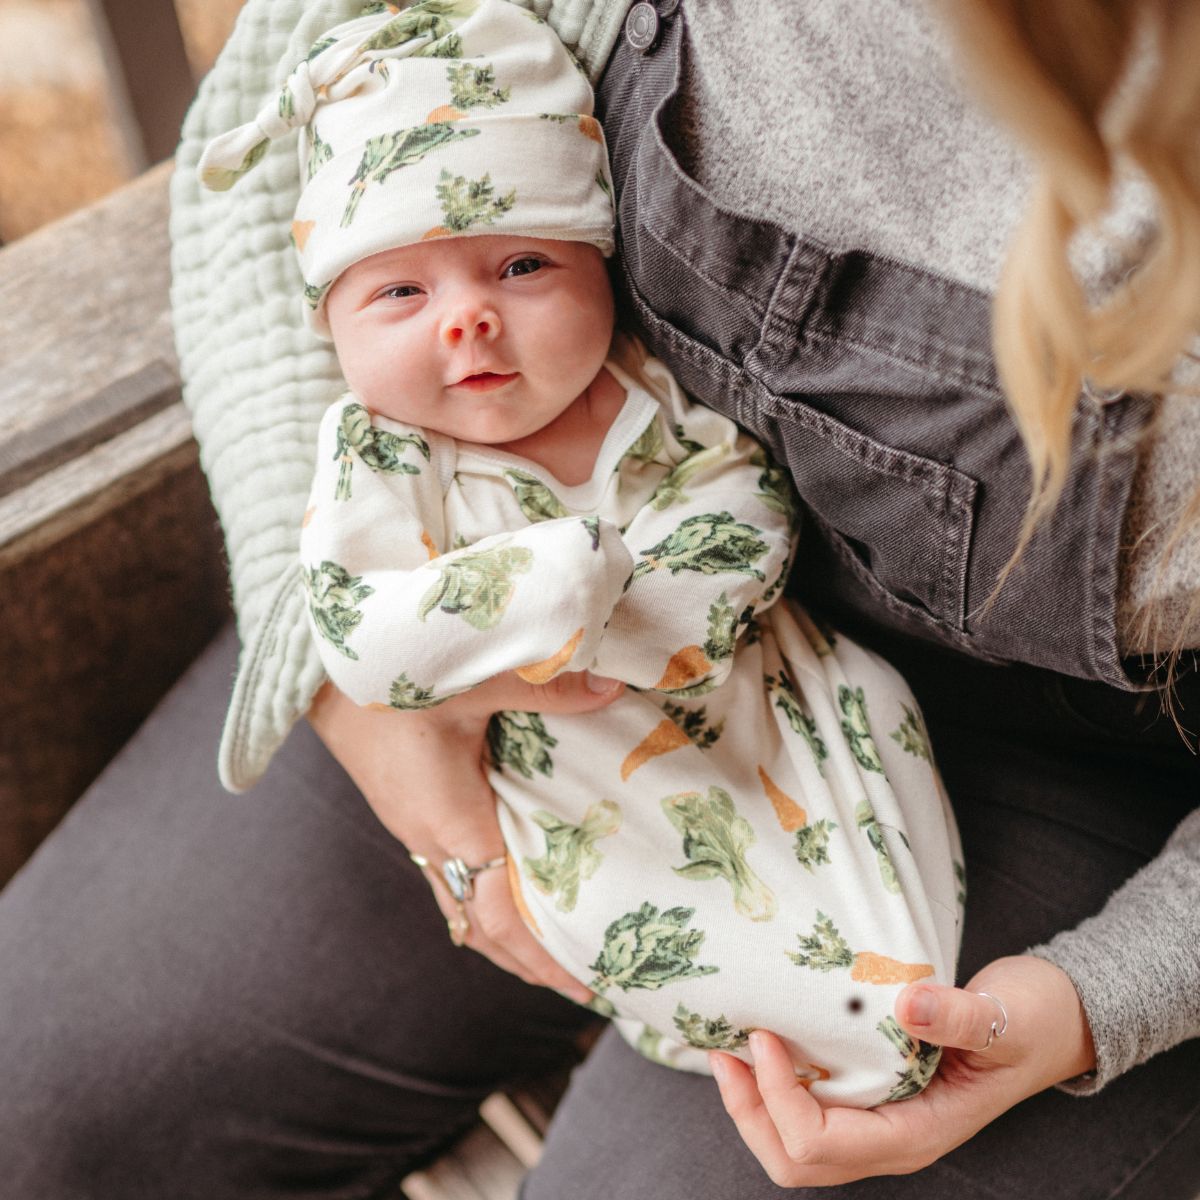 Mom and Newborn Baby cradled in arms wearing the organic cotton and bamboo newborn baby gown and hat set in the fresh veggies print by Milkbarn